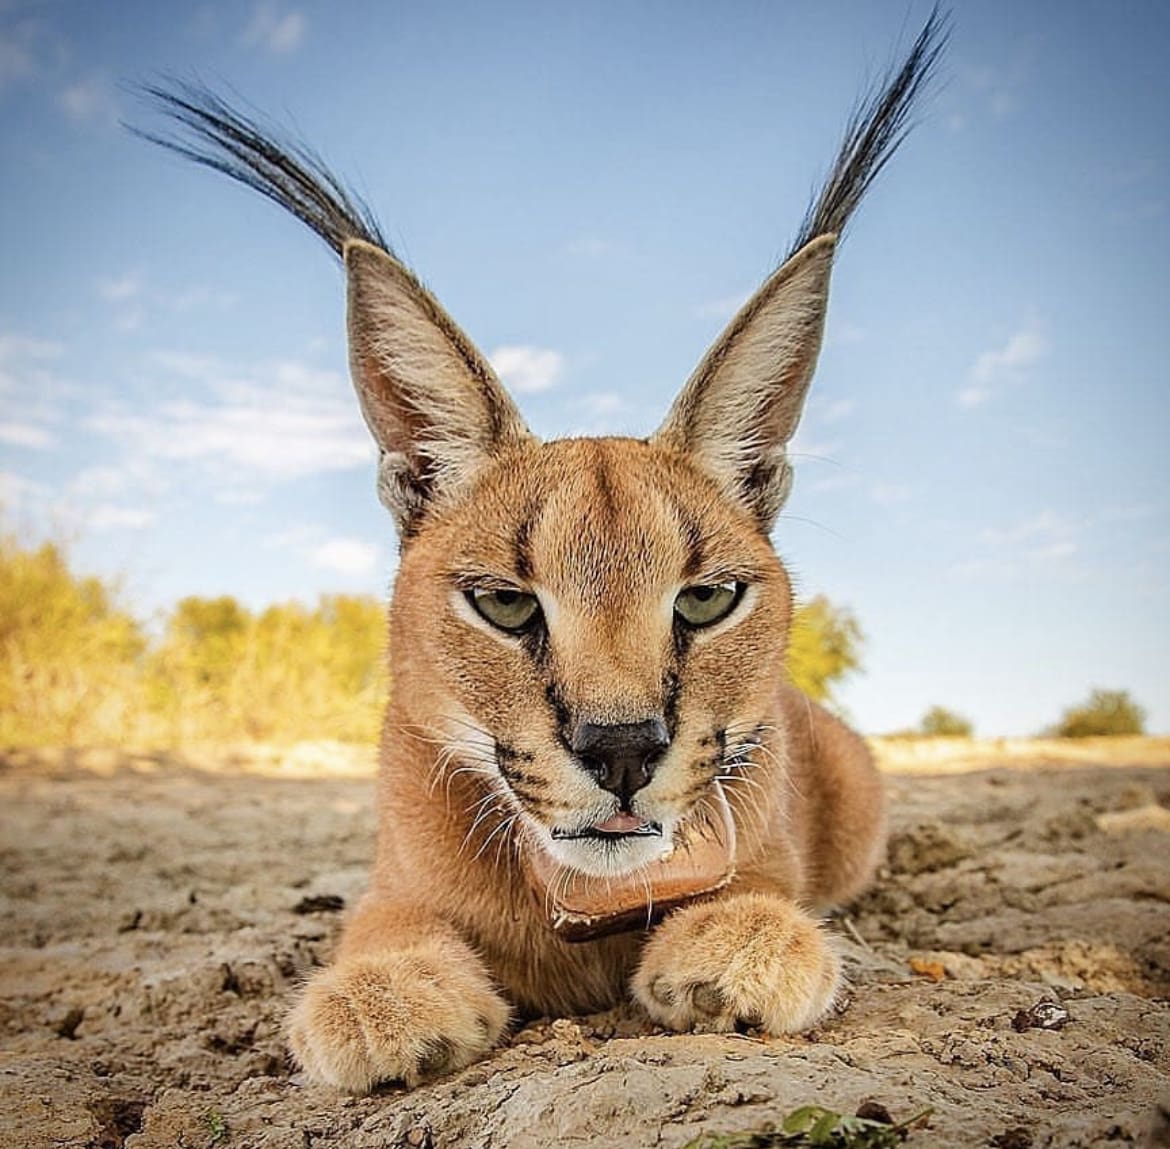 Caracal showing off its ears and eyes in this closeup image